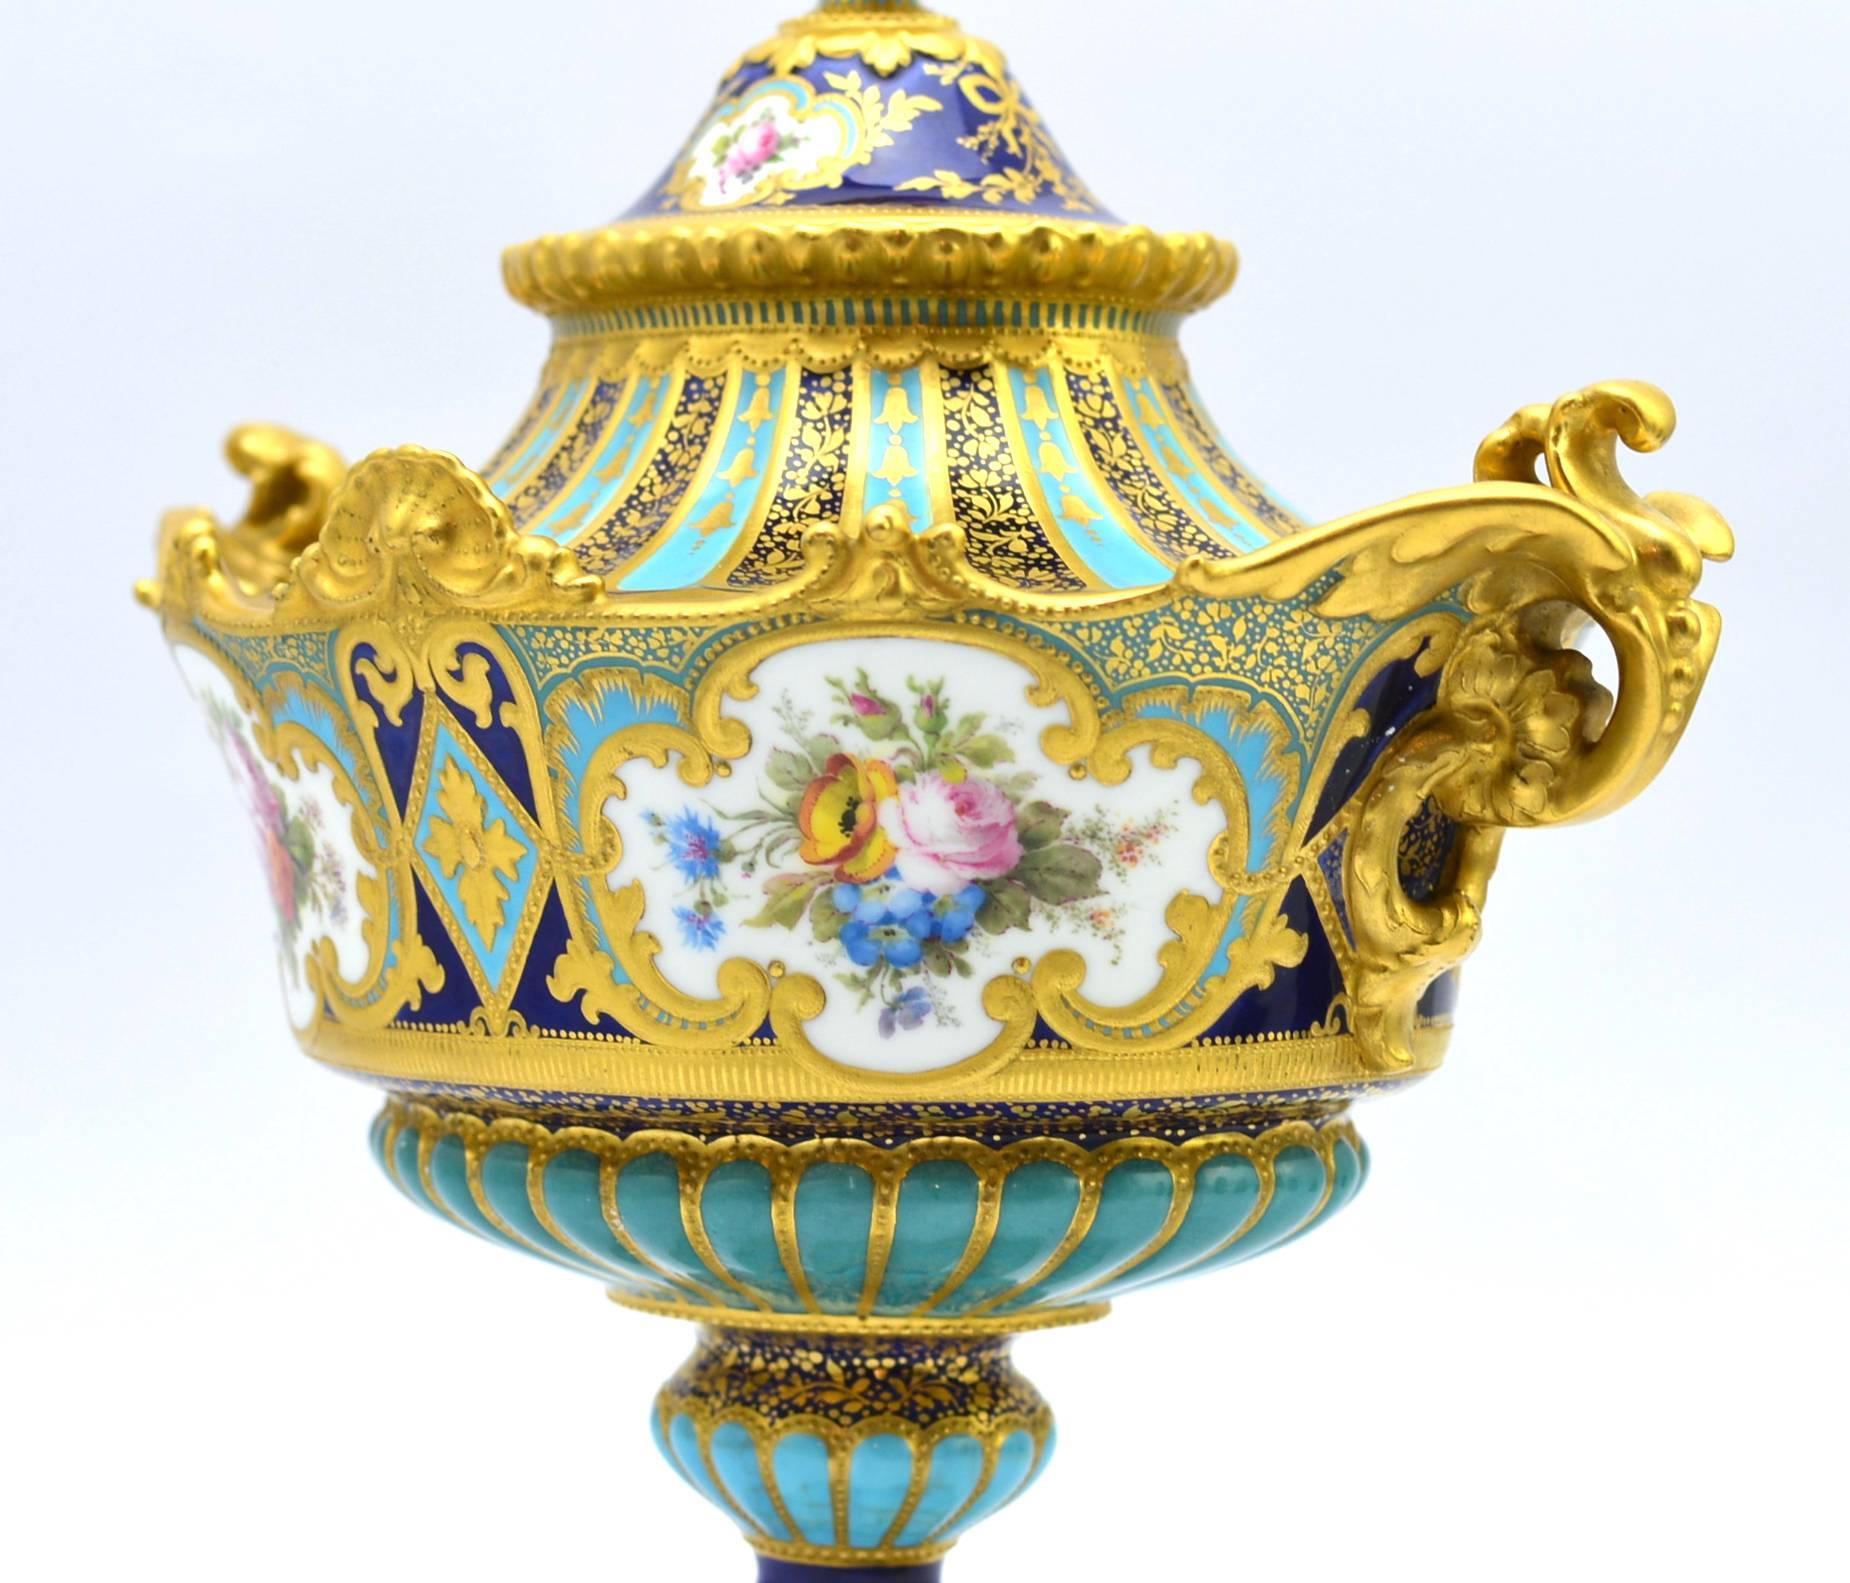 Royal Crown Derby Vase and Cover by Desire Leroy In Excellent Condition For Sale In Adelaide, South Australia